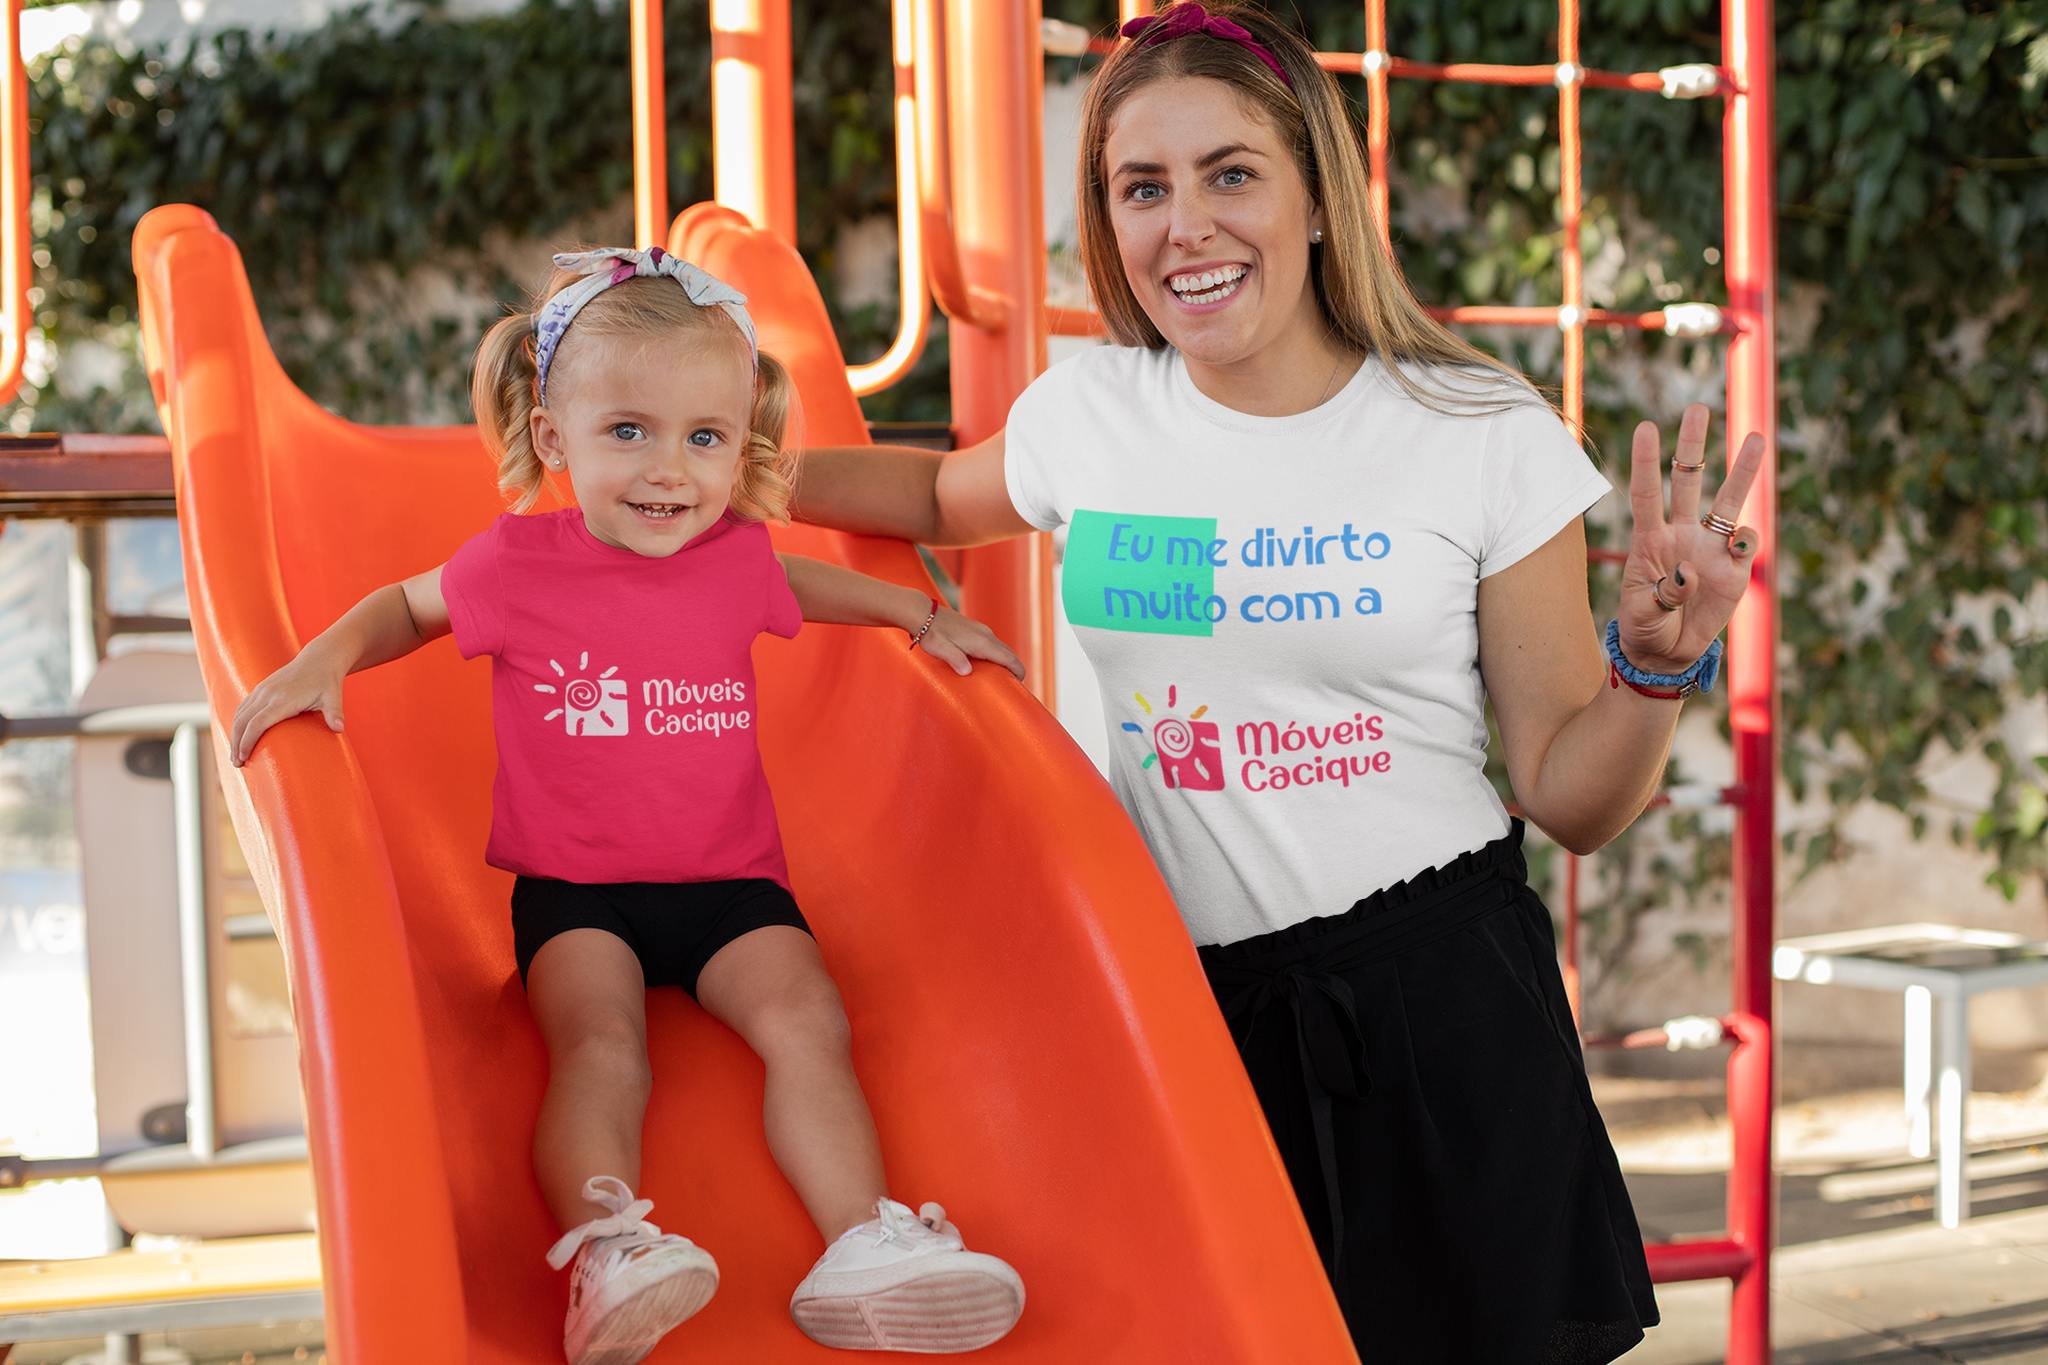 t-shirt-mockup-of-a-little-girl-and-her-mom-having-fun-at-a-playground-26499-easy-resizecom